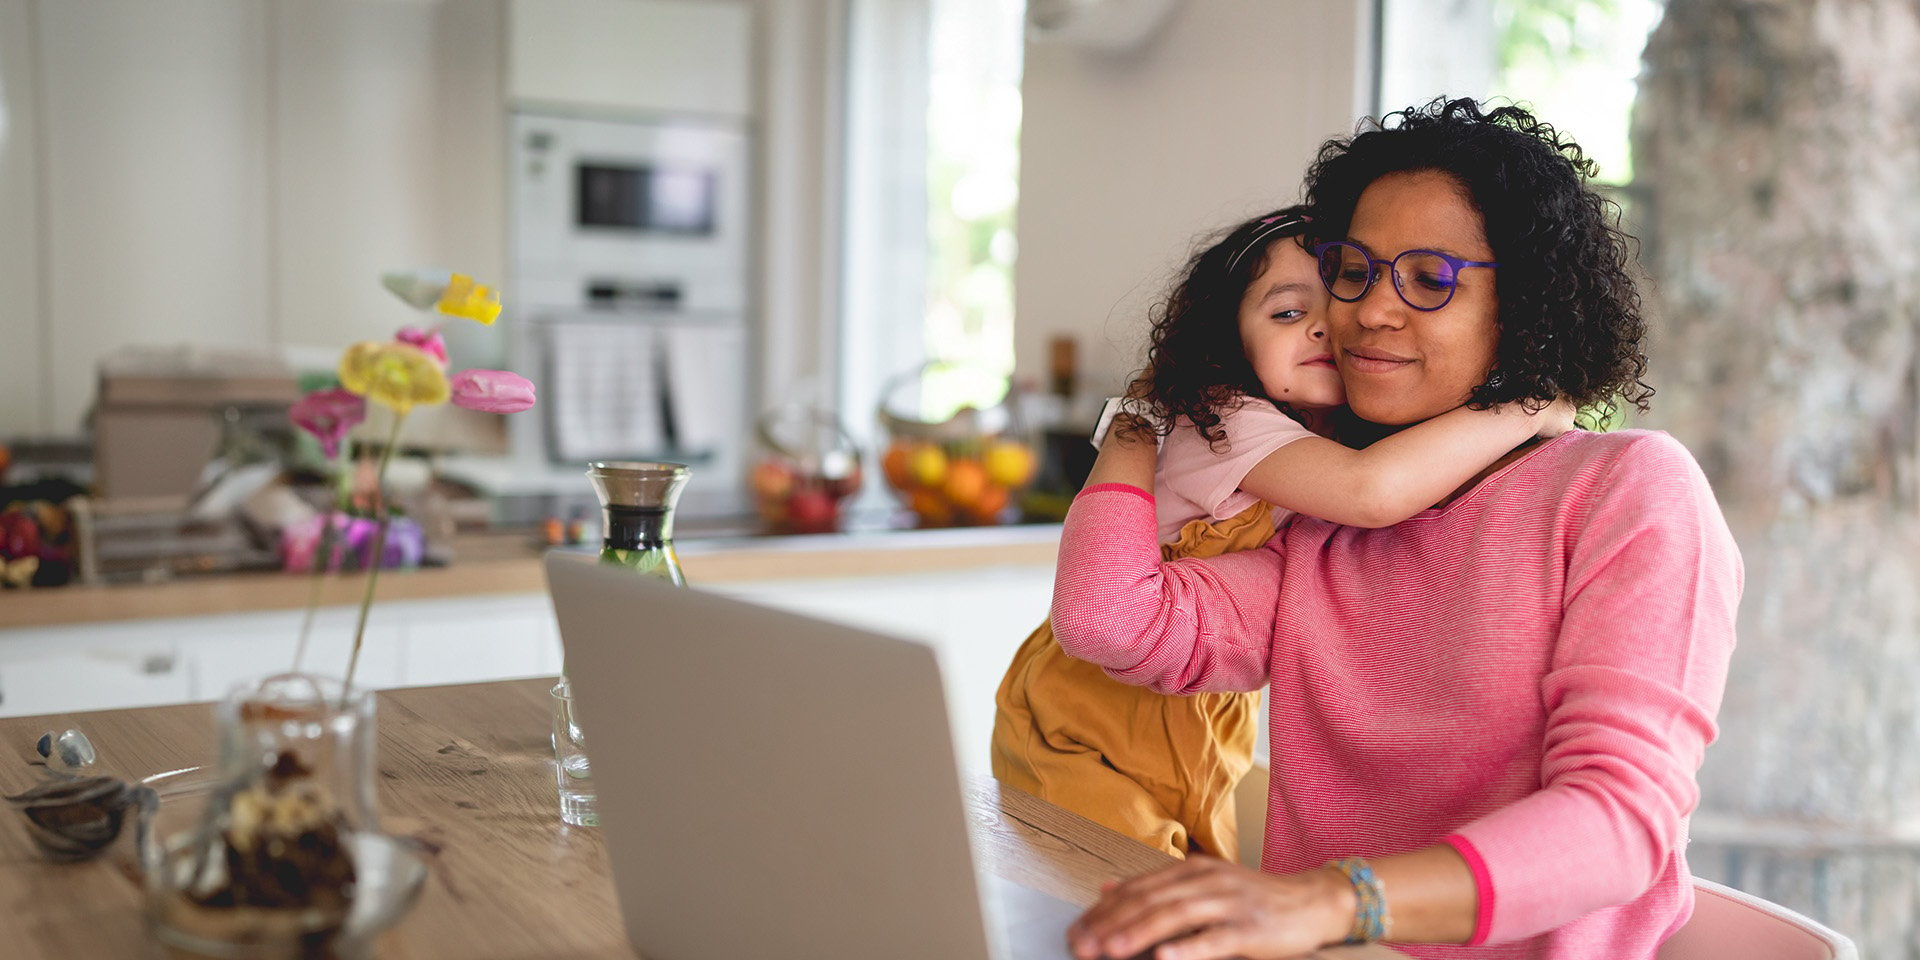 A young daughter embraces her mom warmly at the kitchen table as they find support from Desert Financial, navigating the mortgage assistance process together on their website.